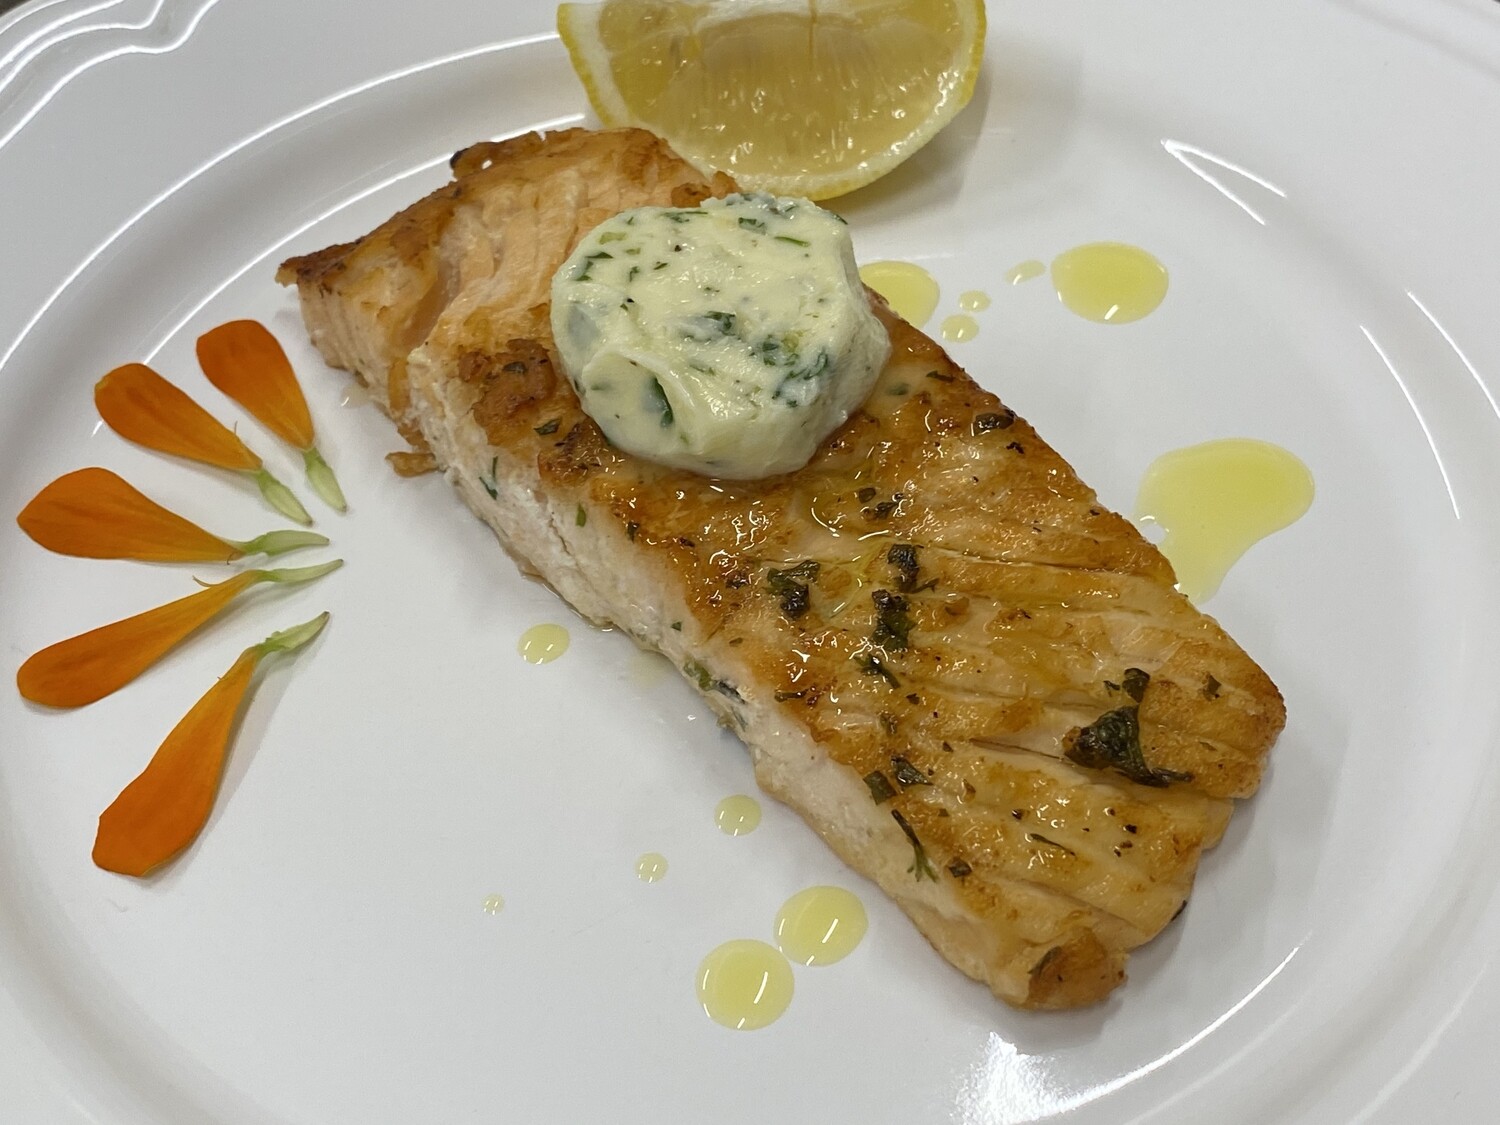 Salmon with Lemon and Herb Butter (Serves 4)